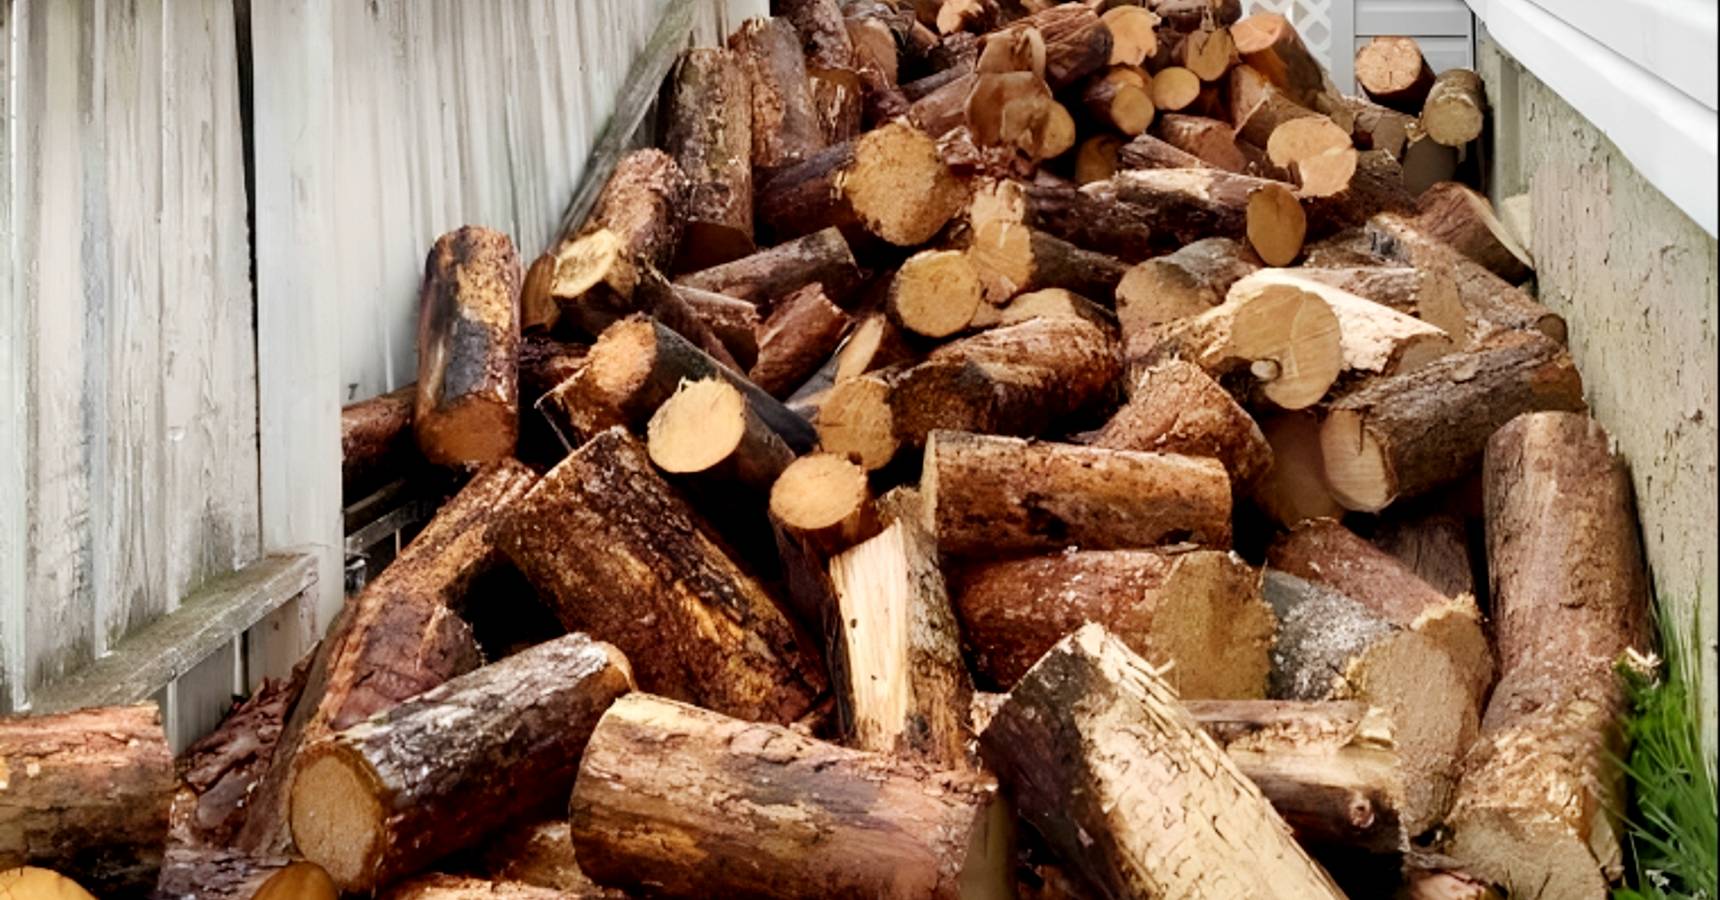 Optical illusion, Optical illusion find the dog among the wooden logs